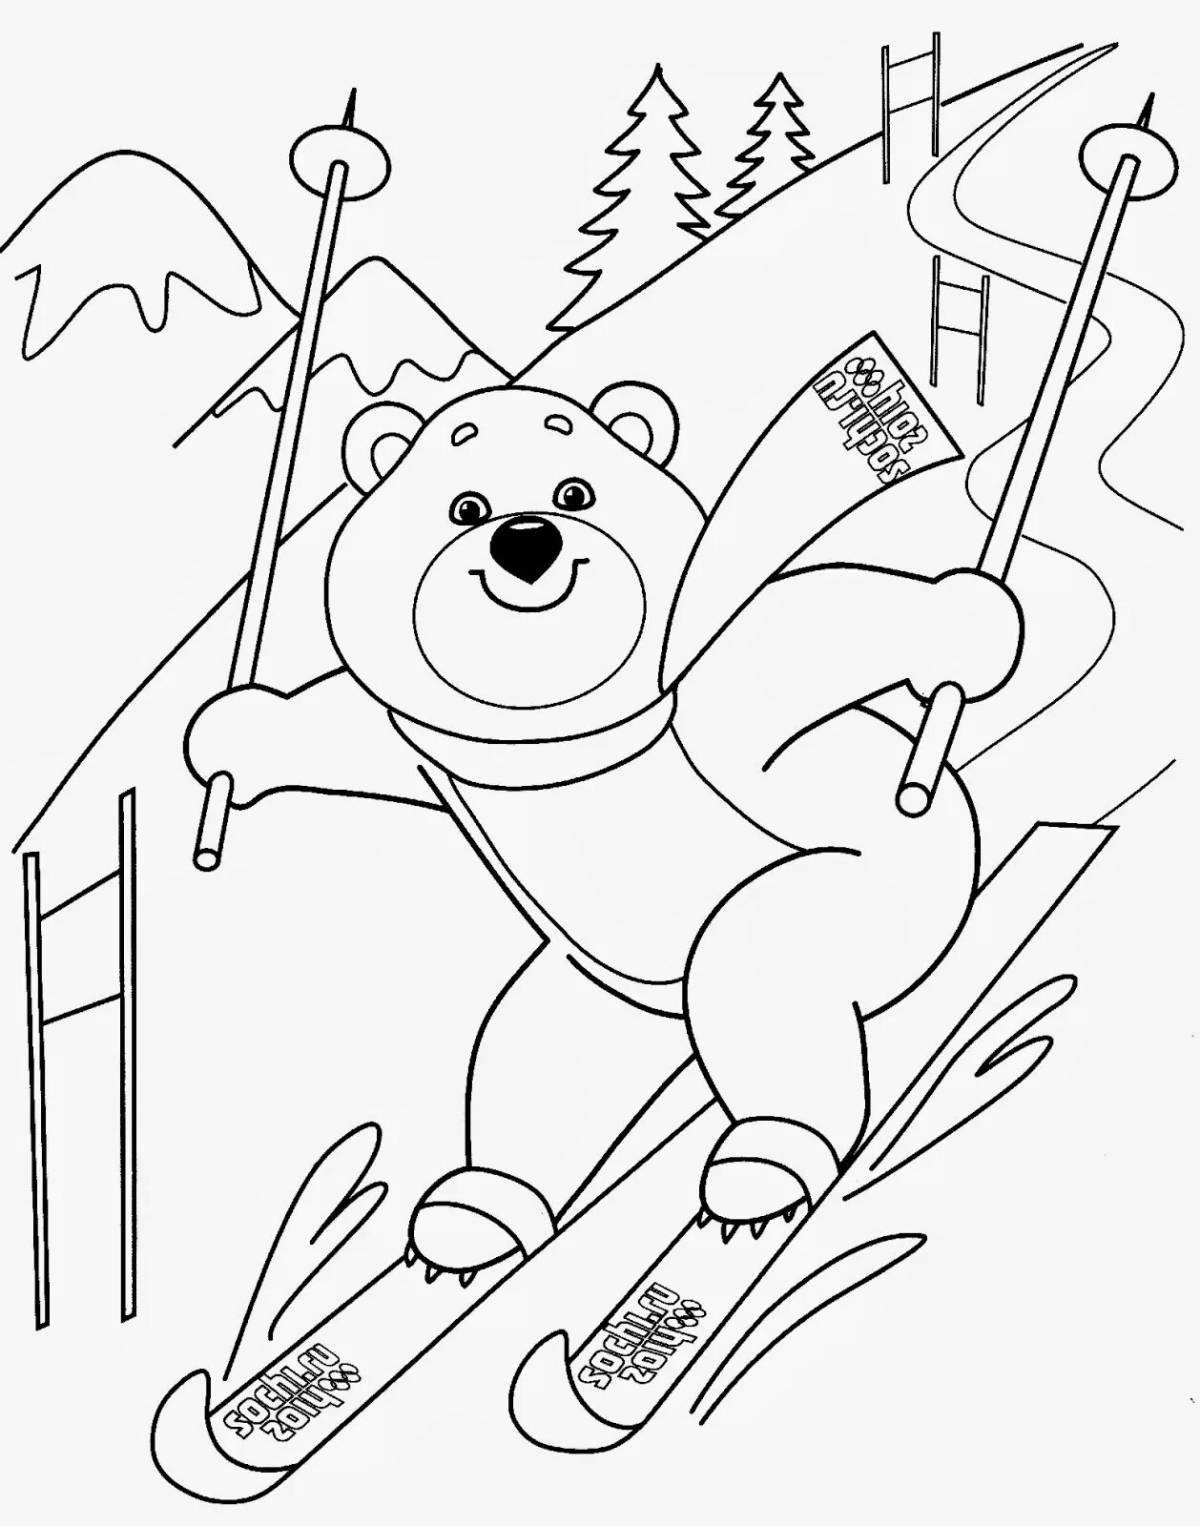 Coloring page playful olympic bear